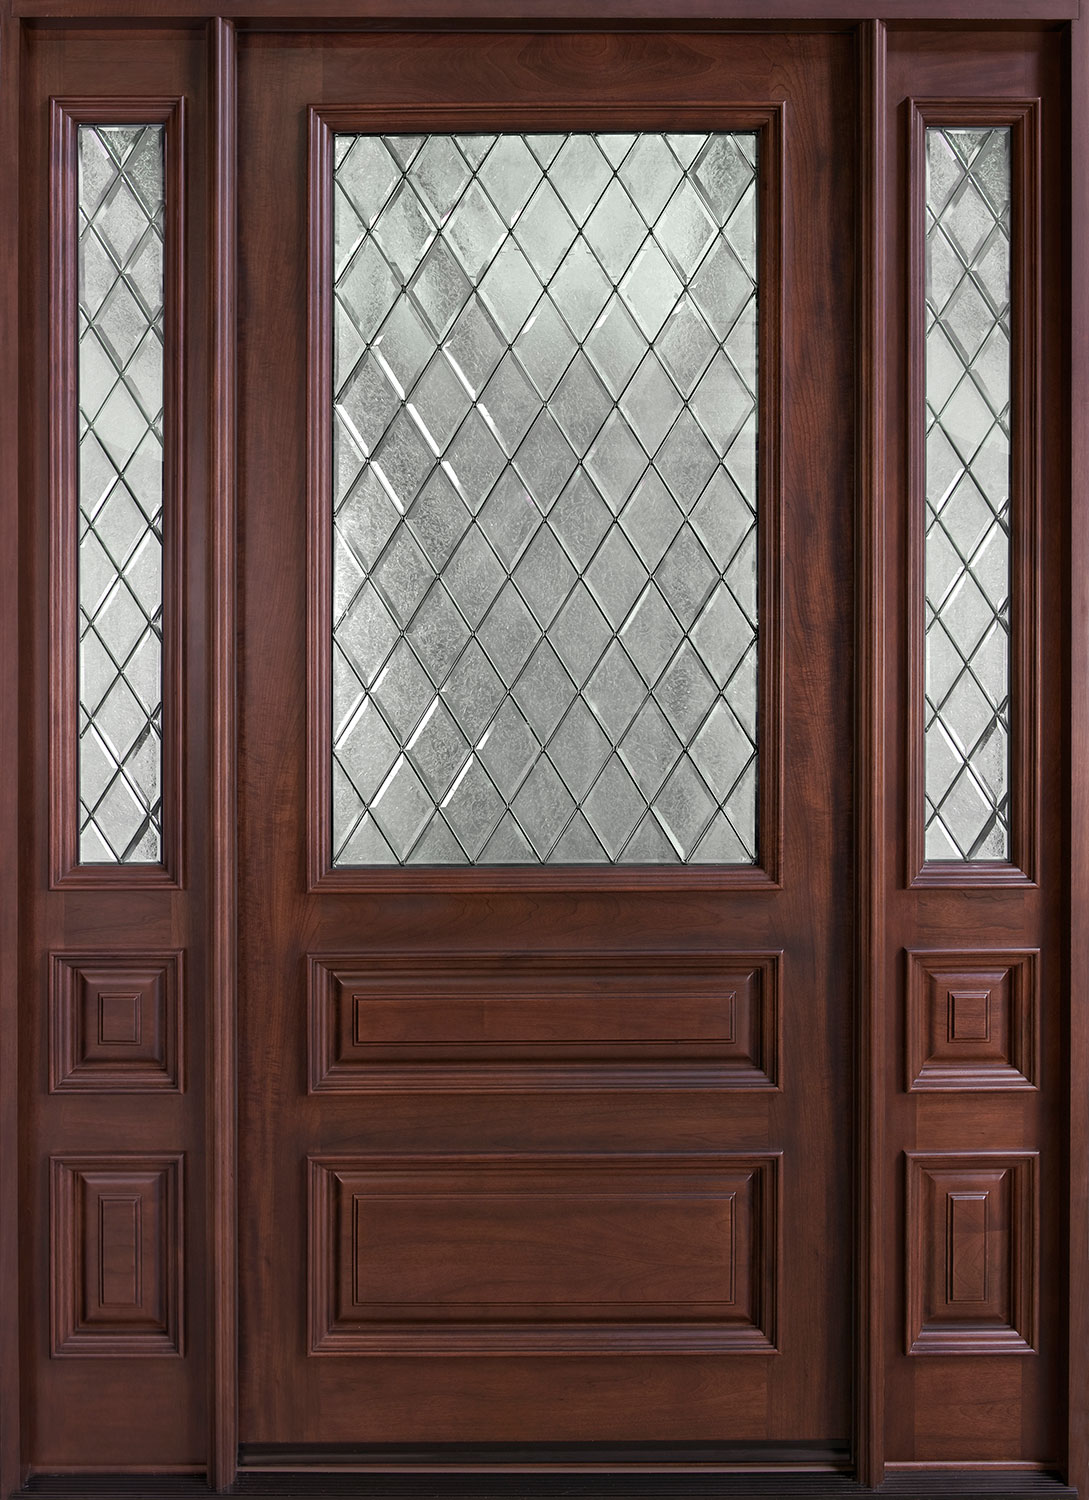 Classic Mahogany Solid Wood Front Entry Door - Single with 2 Sidelites - DB-611WDG 2SL